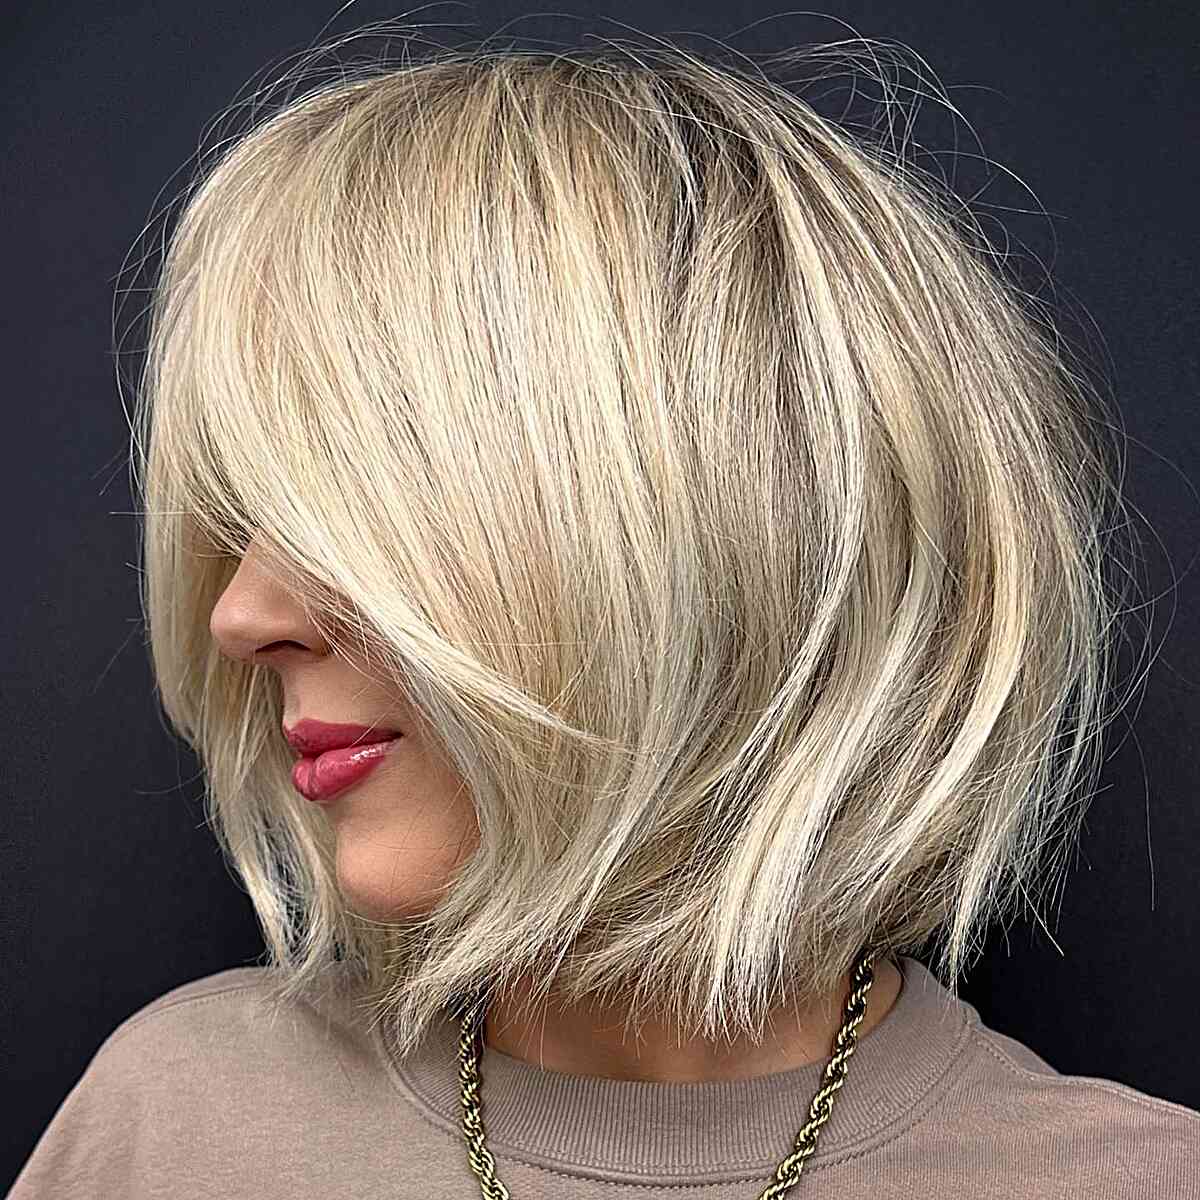 Short Above-the-Shoulder Bob with Volume for women with blonde hair